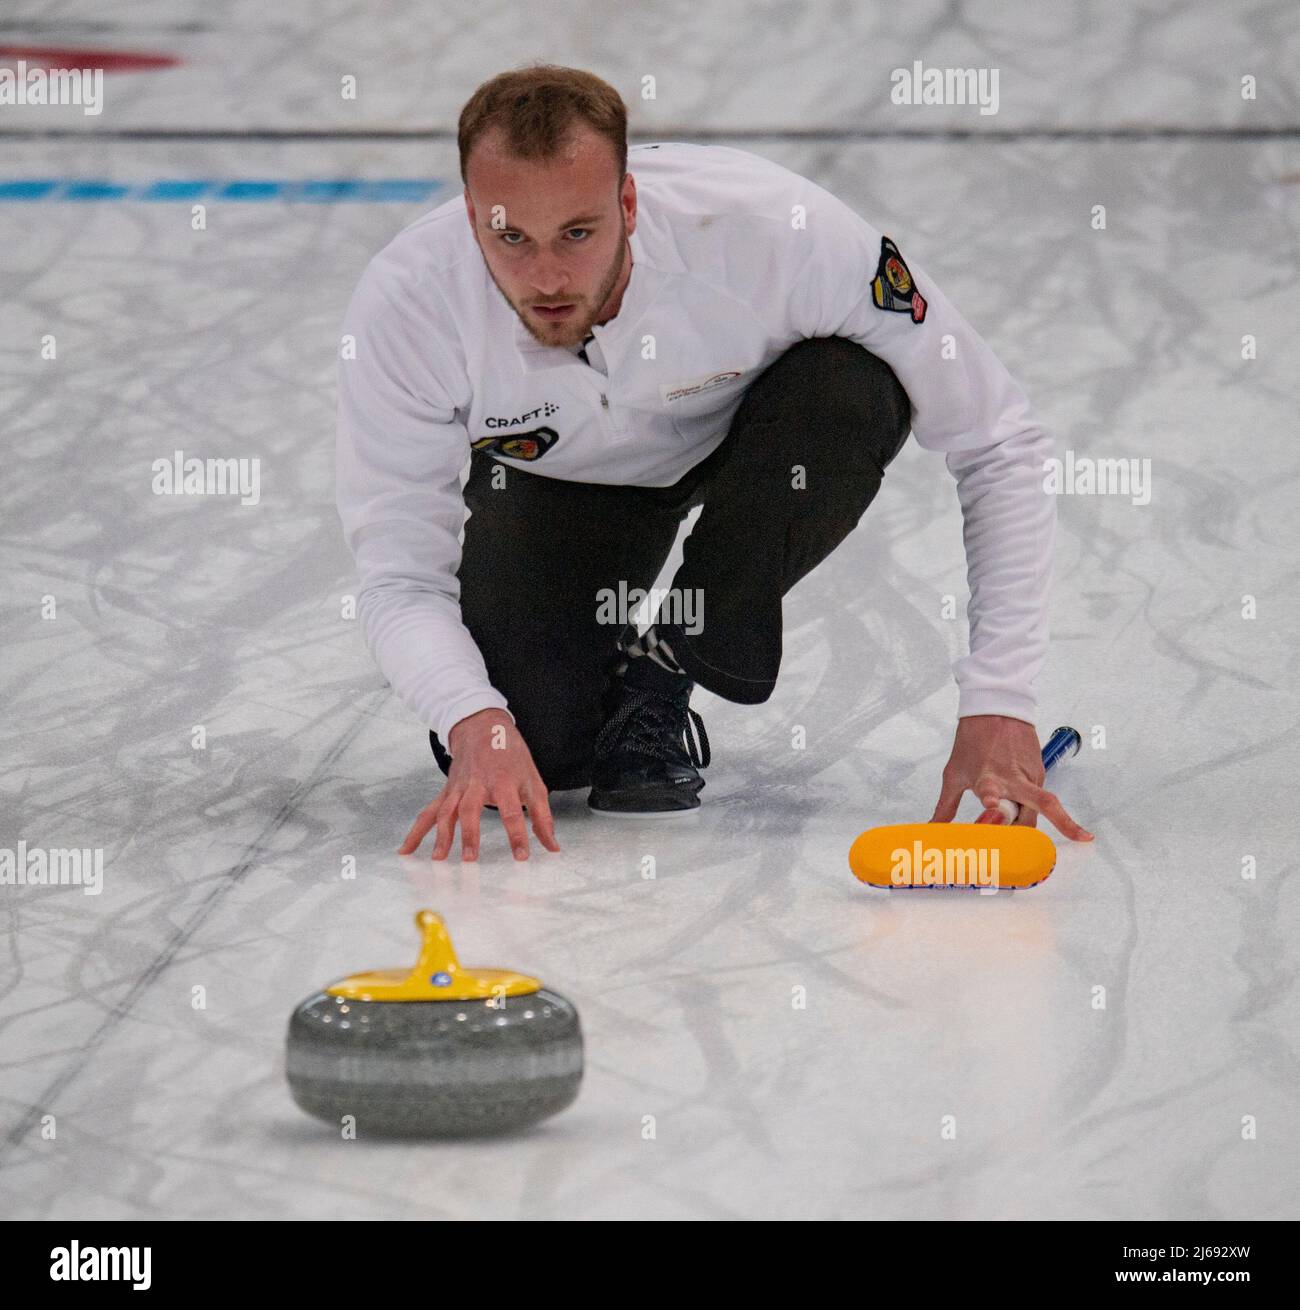 Geneva Switzerland, 29th April 2022:  Magnus RAMSFJELL of Norway is in action during the World Mixed Doubles Curling Championship 2022. Credit. Eric Dubost/Alamy Live News. Stock Photo